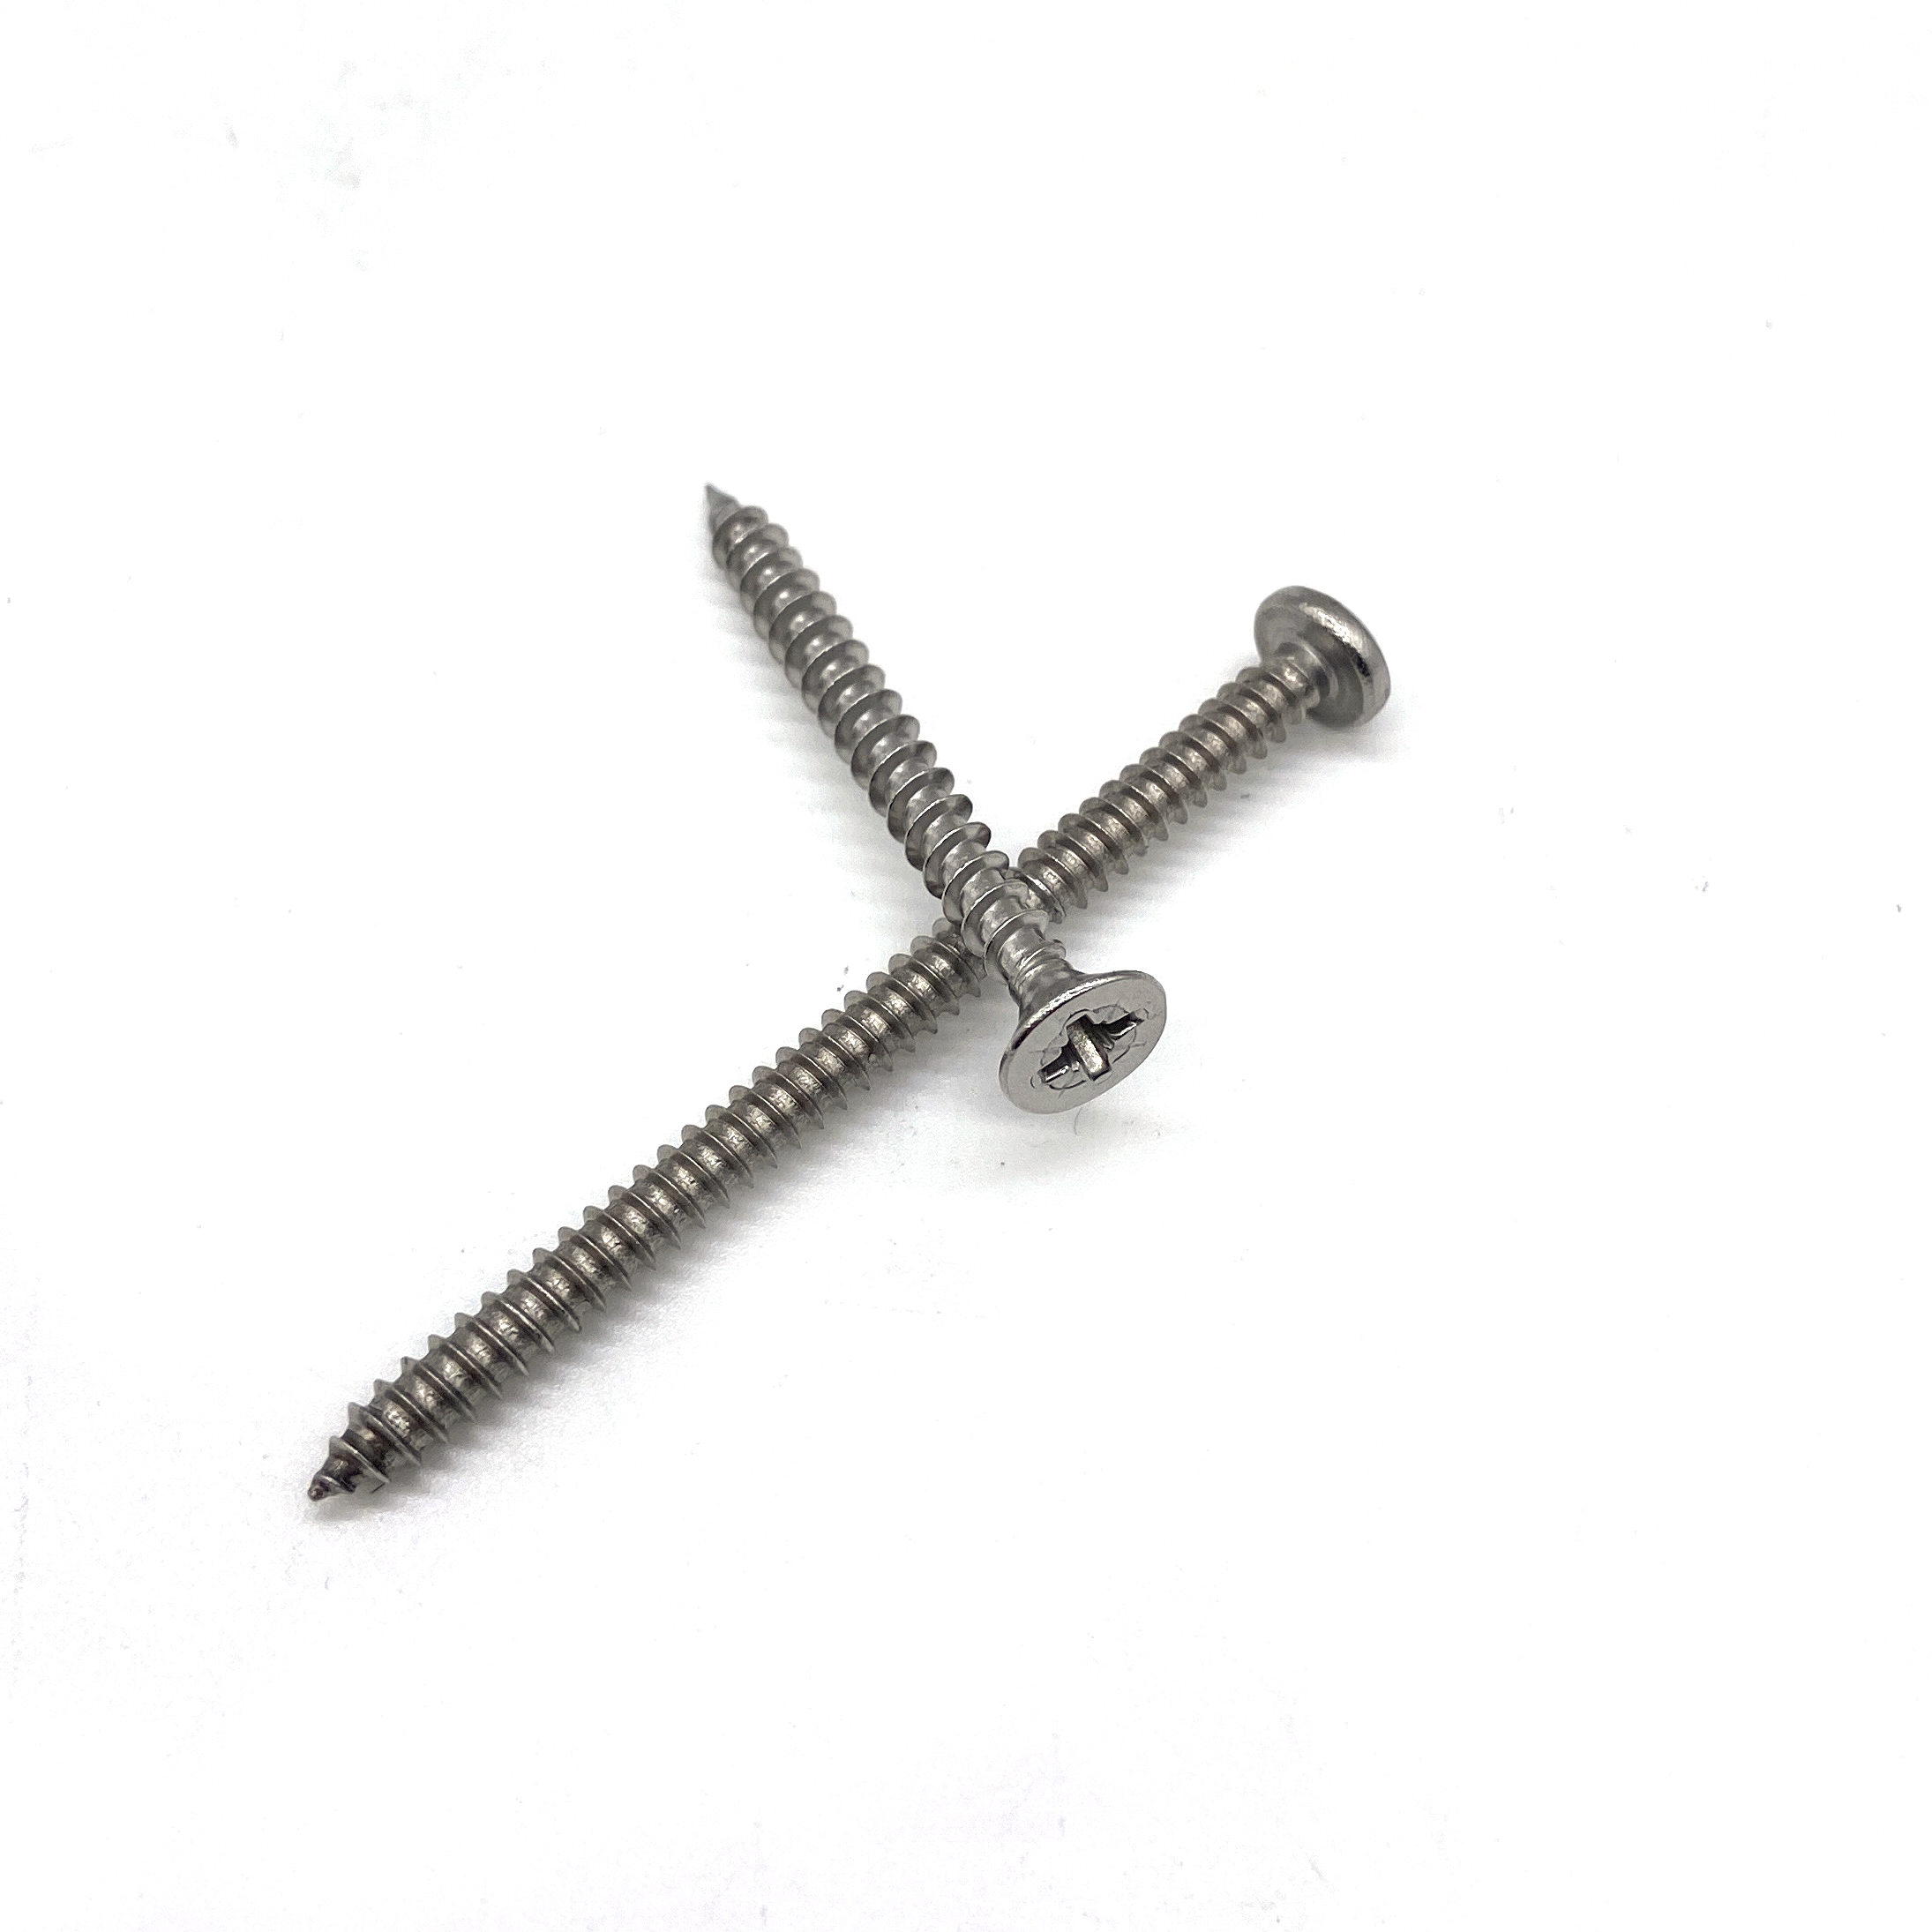 SS316 Stainless Steel SS304 Concrete Fixings Button Pan Head Wood Self Tapping Screw 